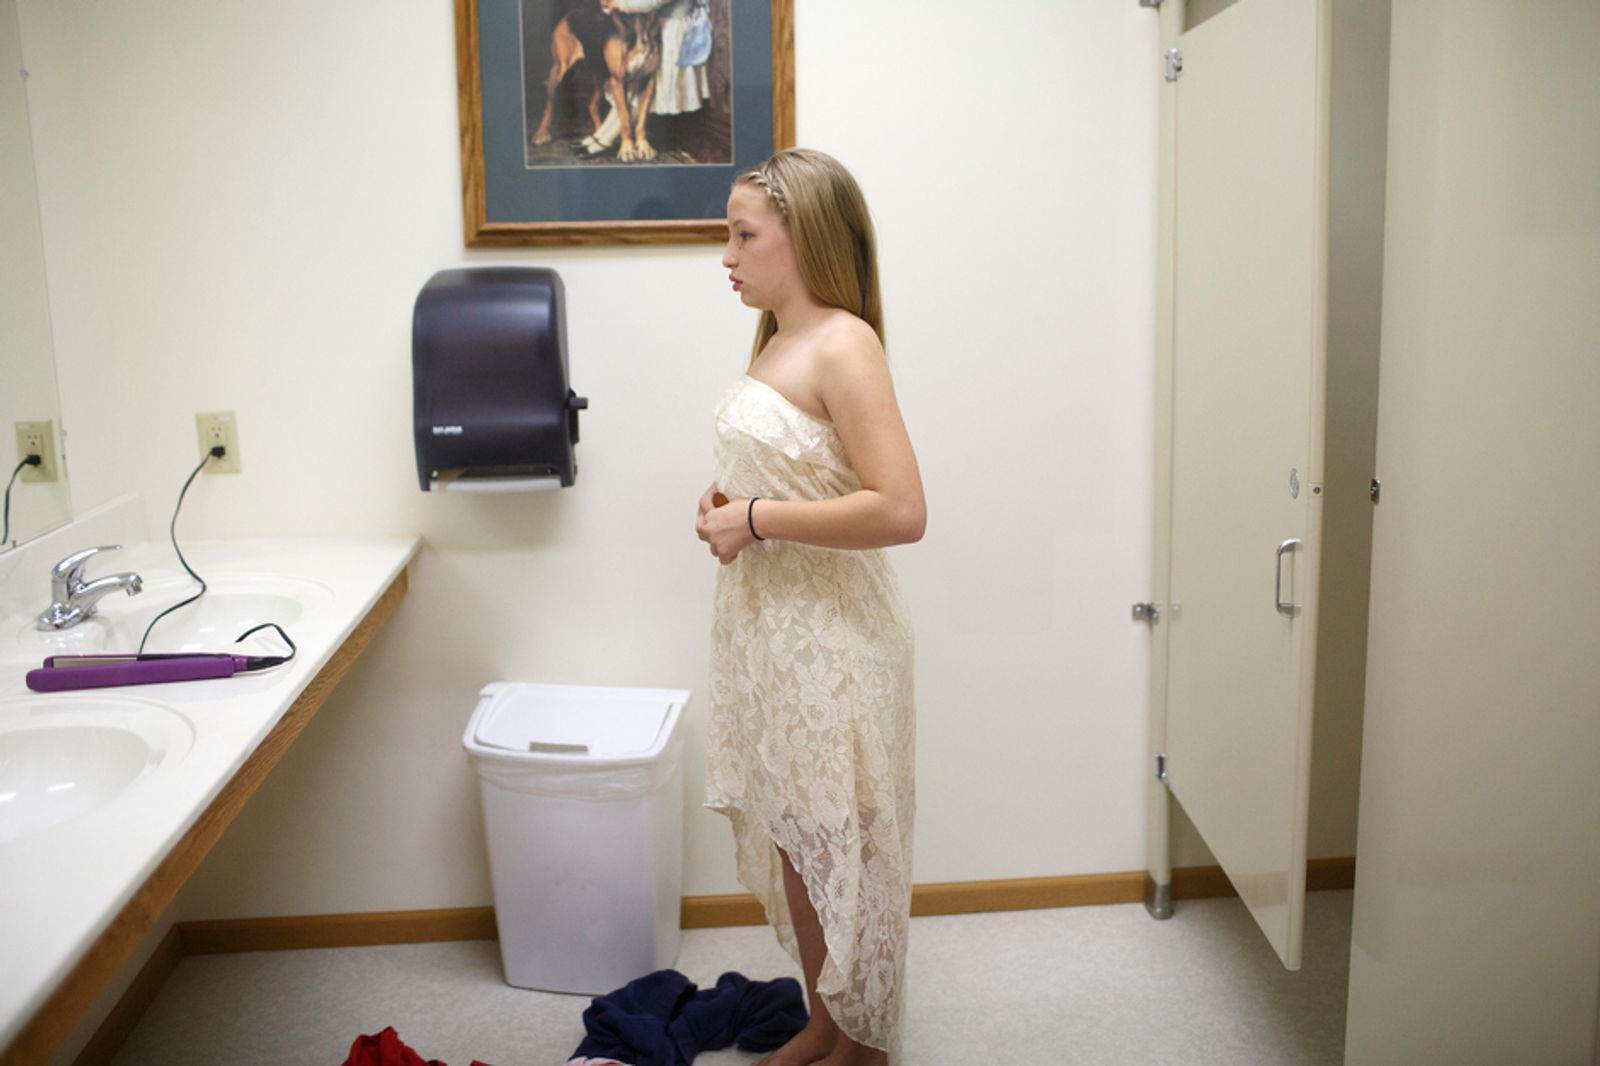 © Maddie Mcgarvey - Sonya, now 13, inspects herself in the mirror before her Aunt's wedding.